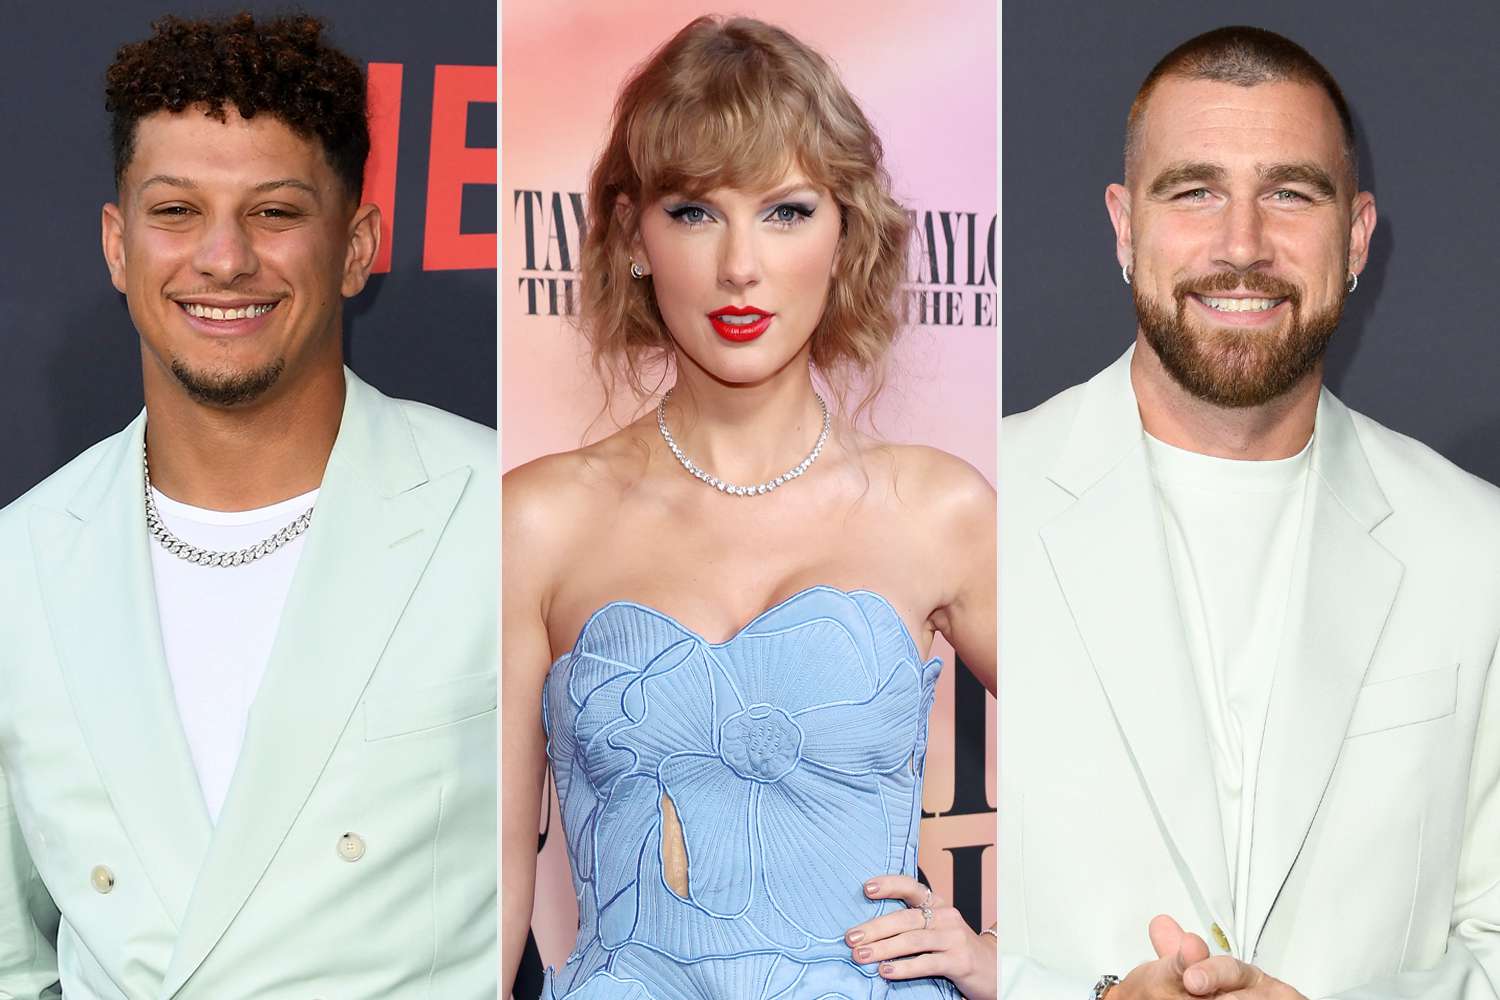 Patrick Mahomes Gushes Over Taylor Swift: 'She's Part of the Team'